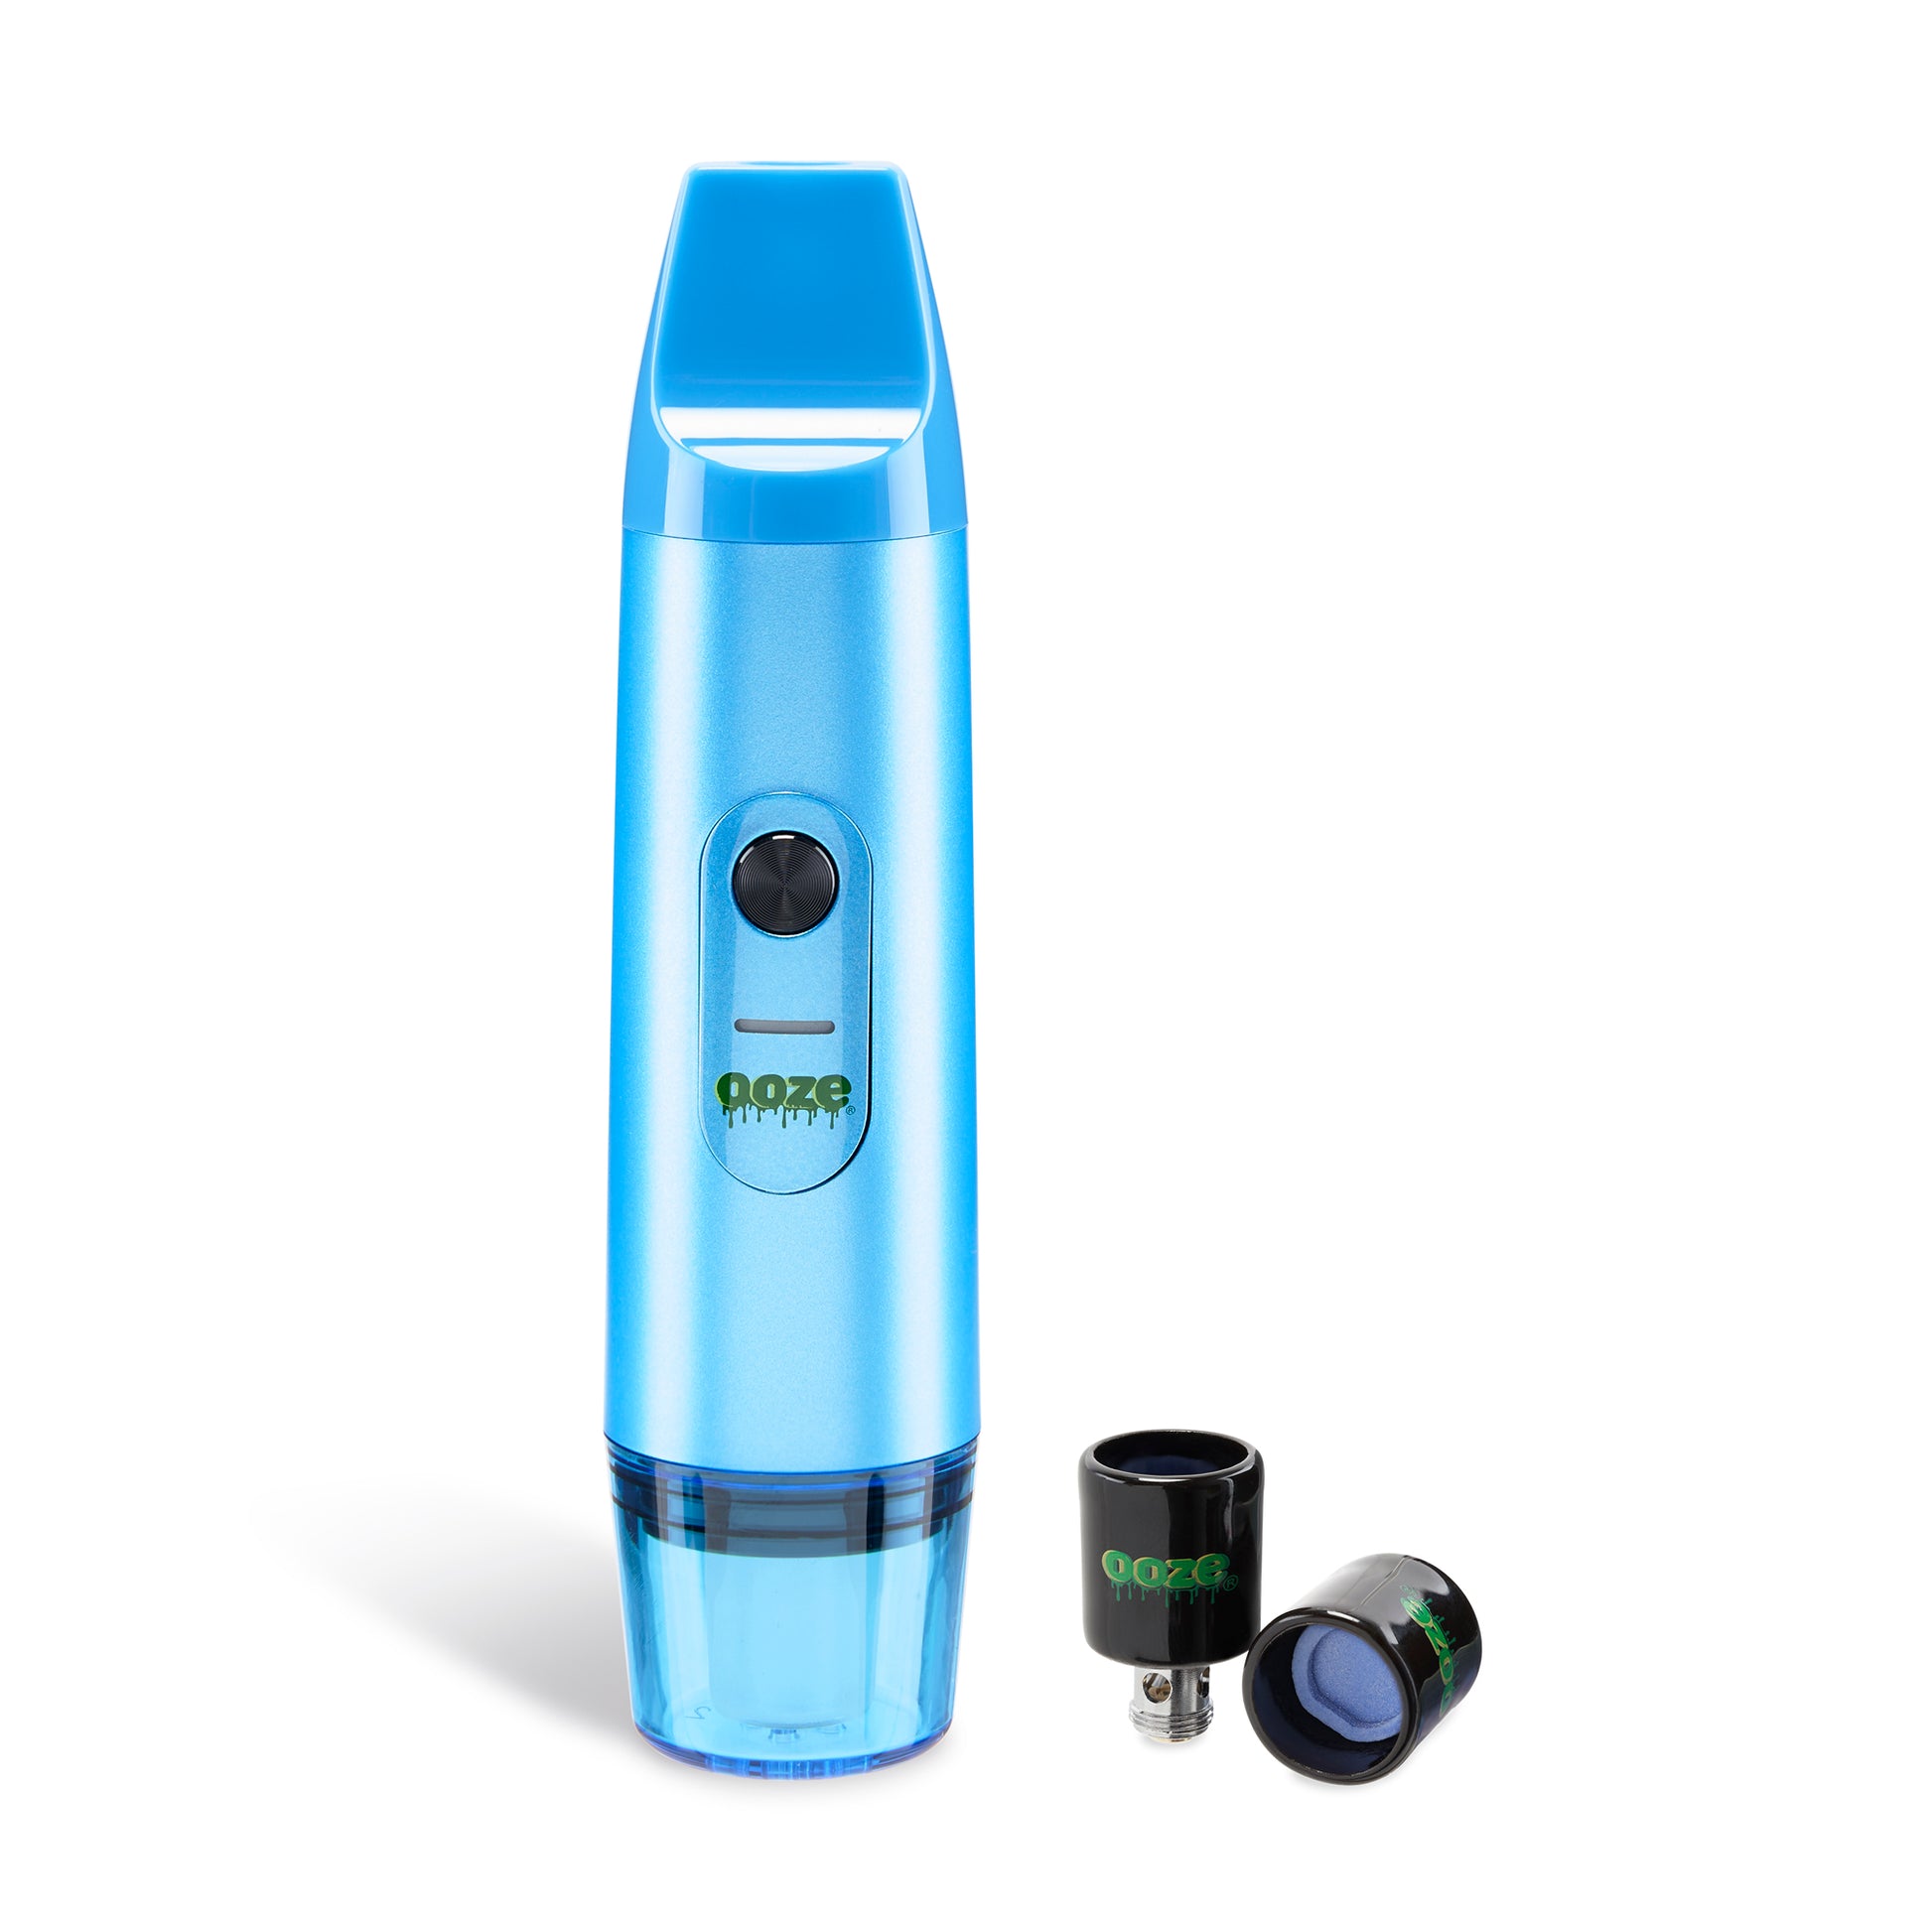 The Arctic Blue Ooze Booster extract vaporizer is standing upright to be used as a handheld vape. Two Onyx Atomizers are to the right, one with upright and one is on its side.